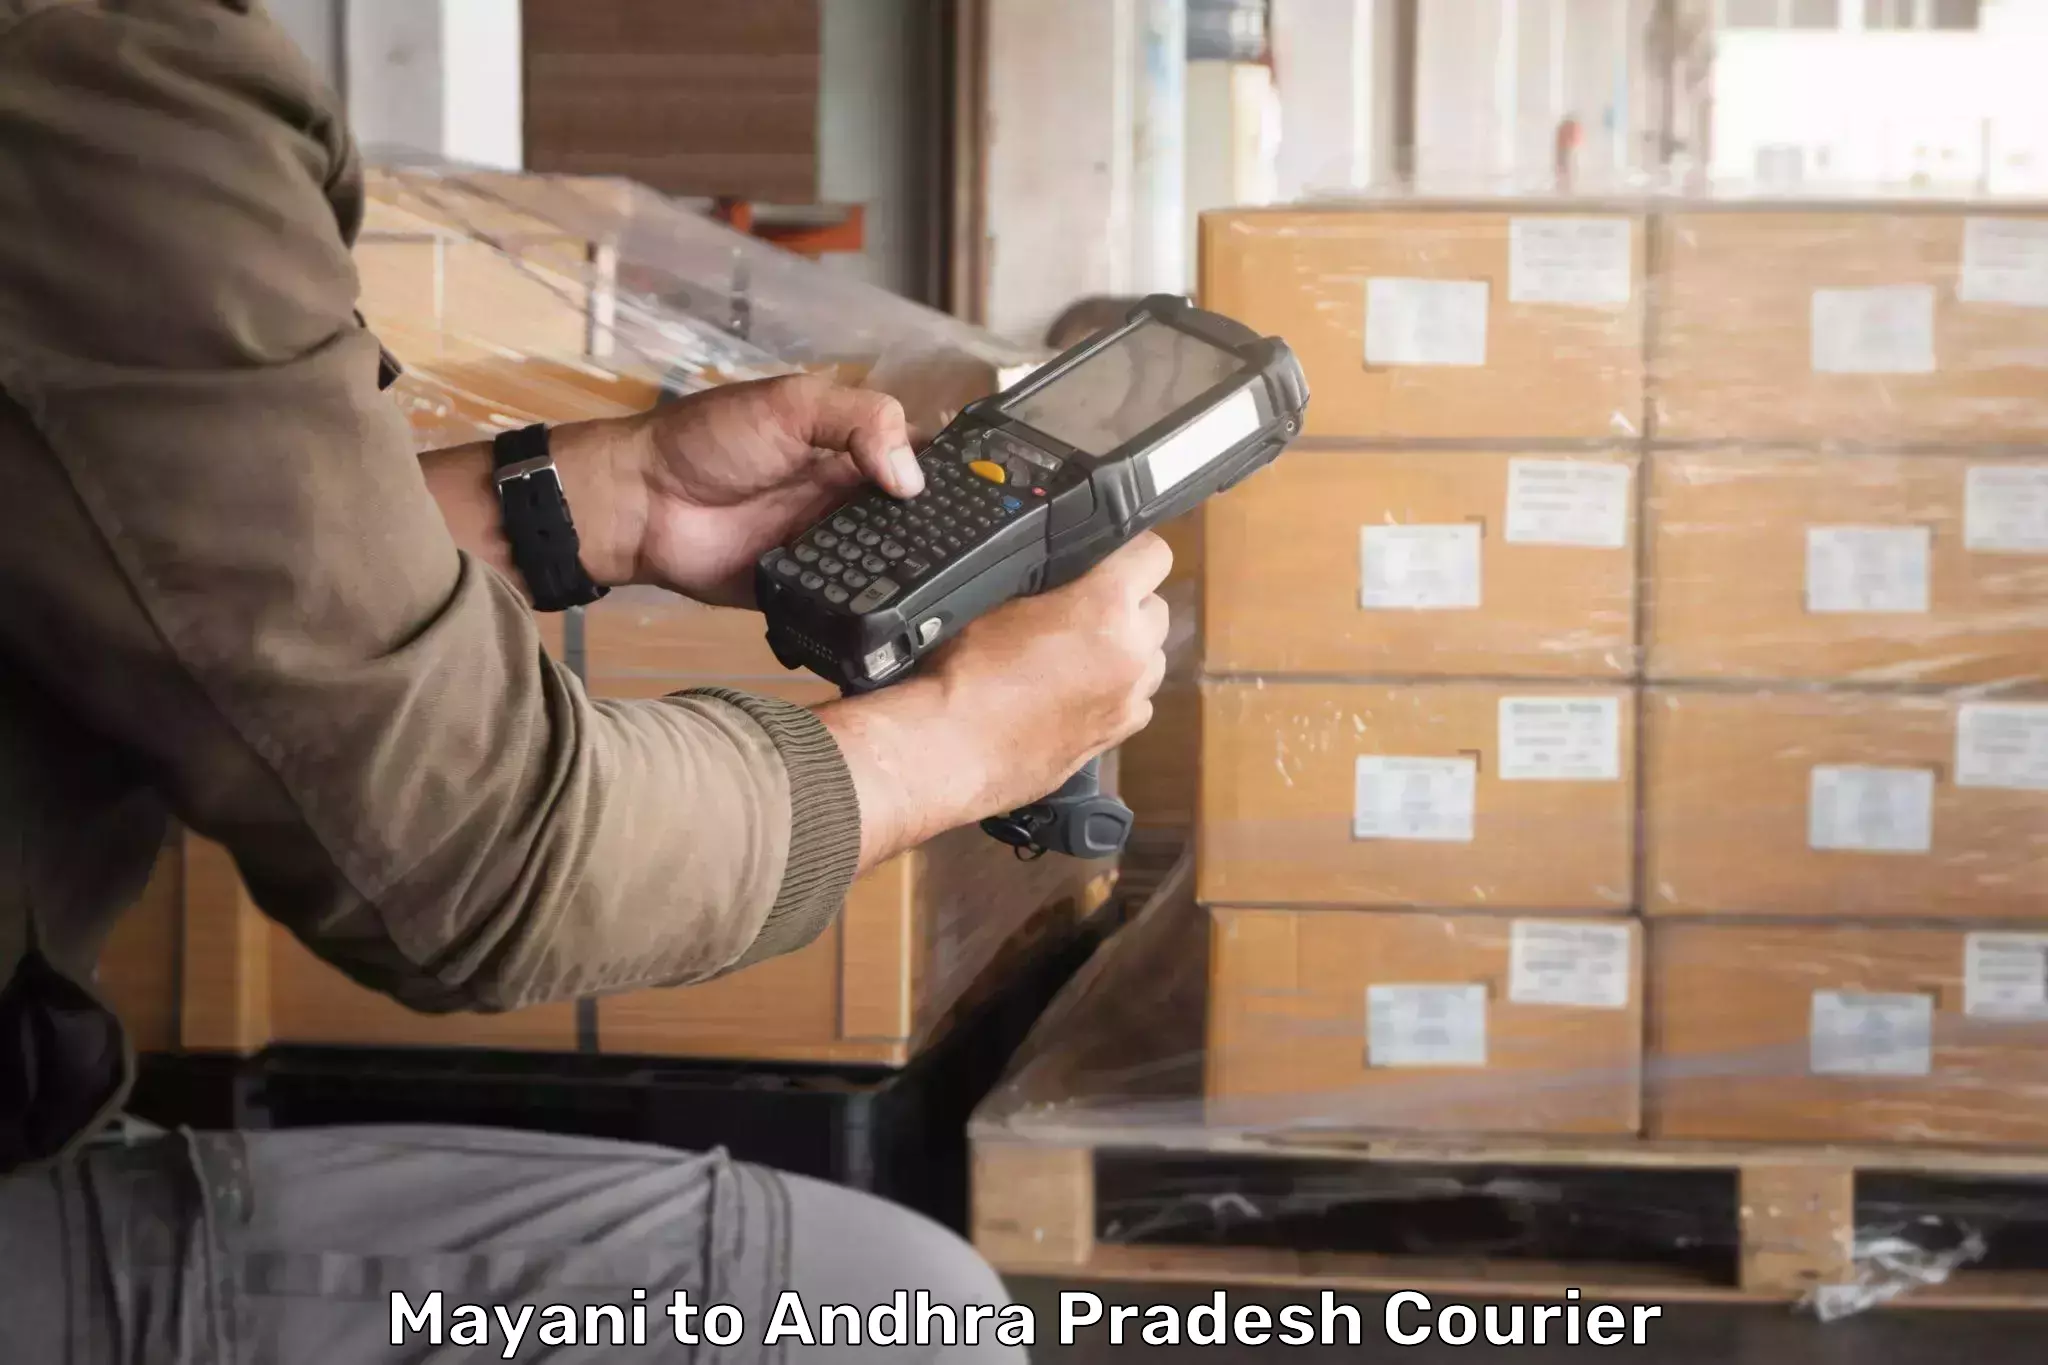 Courier insurance Mayani to Visakhapatnam Port